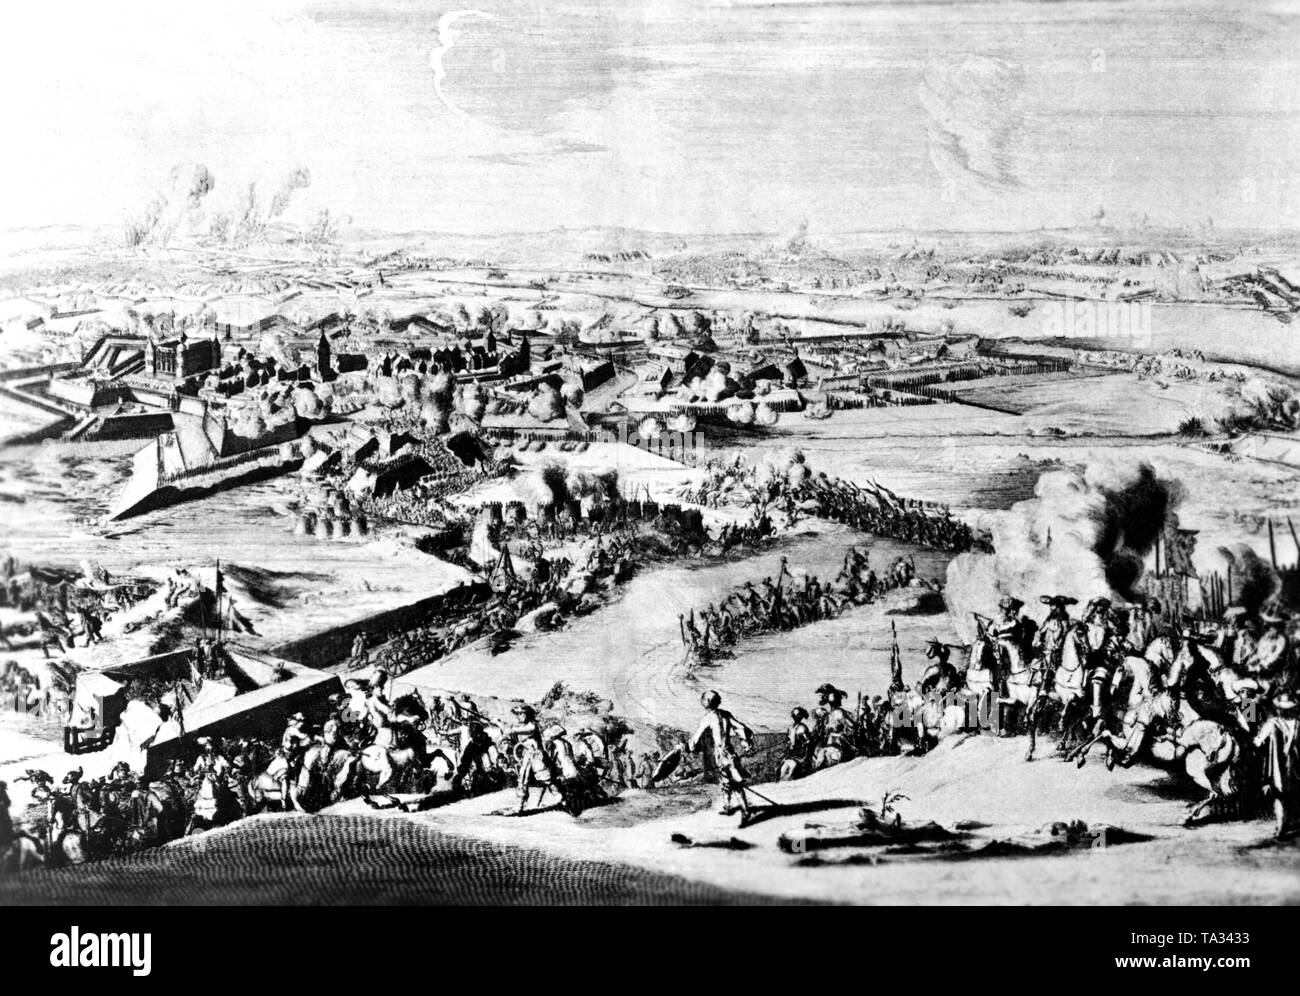 The Palatine War of Succession (1688-1697), - often called the War of the Grand Alliance or the War of the League of Augsburg,  Nine Years' War, was a conflict provoked by the French King Louis XIV to gain the recognition of the Holy Roman Empire of his acquisitions as part of the Reunion policy. The first war aim was the city and fortress of Philippsburg in the Palatinate. The contemporary copper engraving by Romanus de Hooghe shows the siege and destruction of the city by French troops. Stock Photo